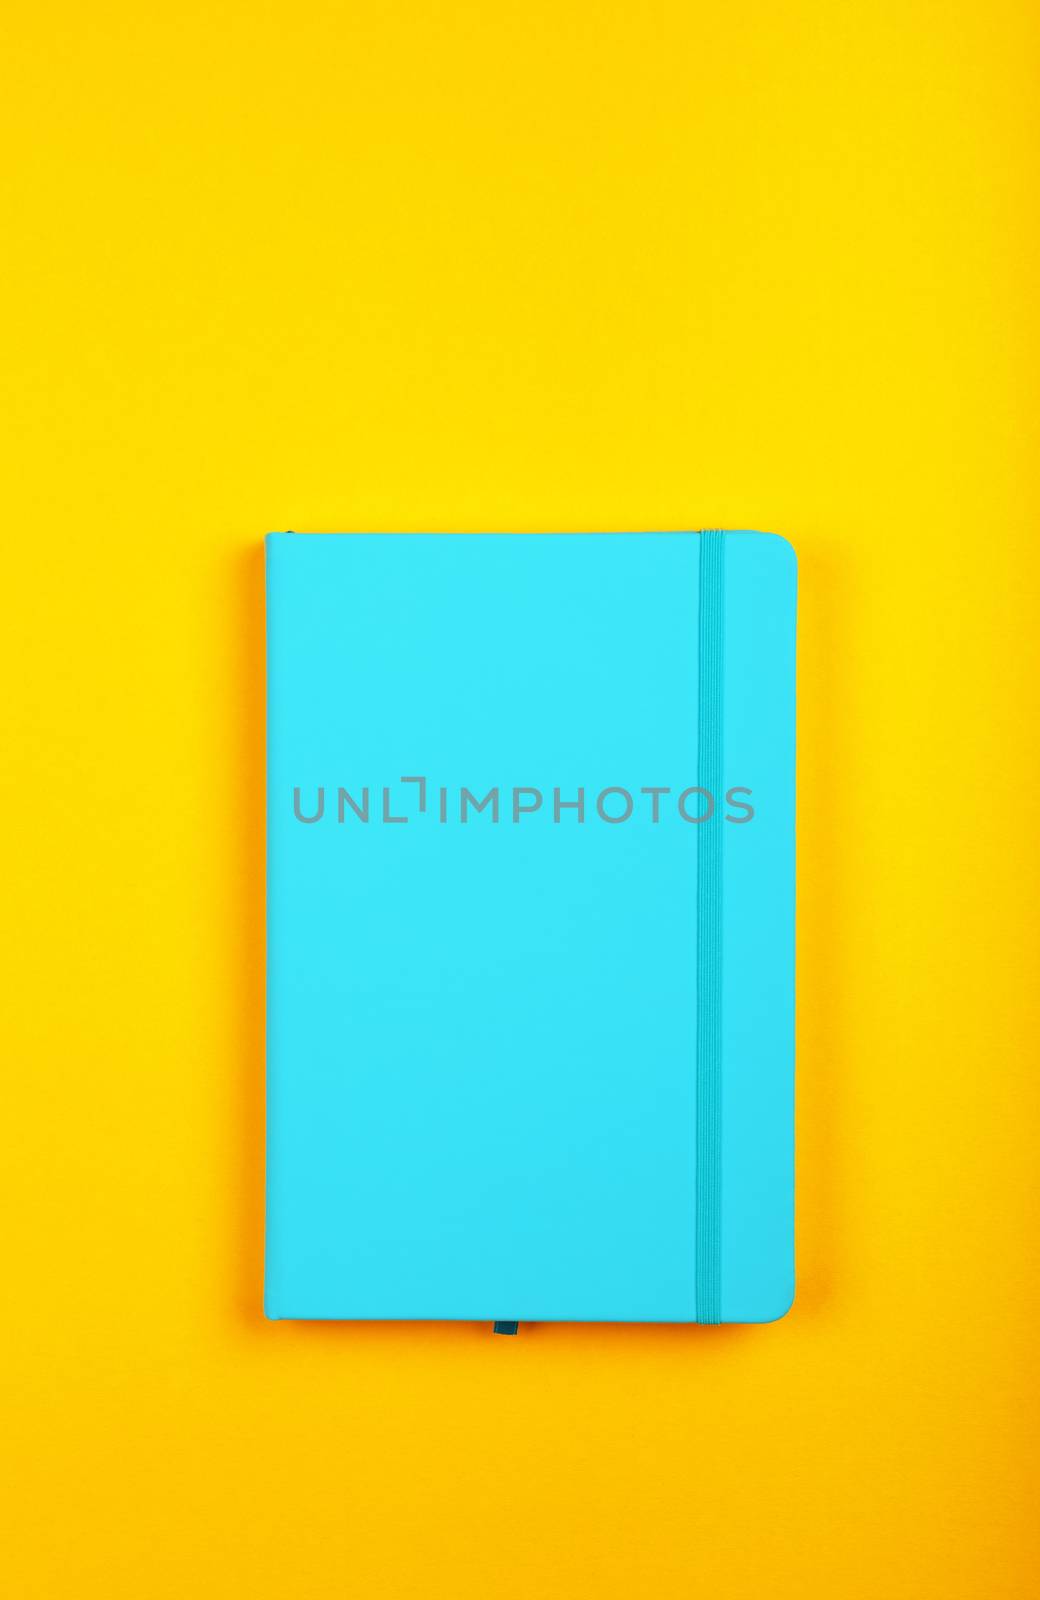 One closed blue faux leather cover notebook on vivid yellow paper background, flat lay, directly above